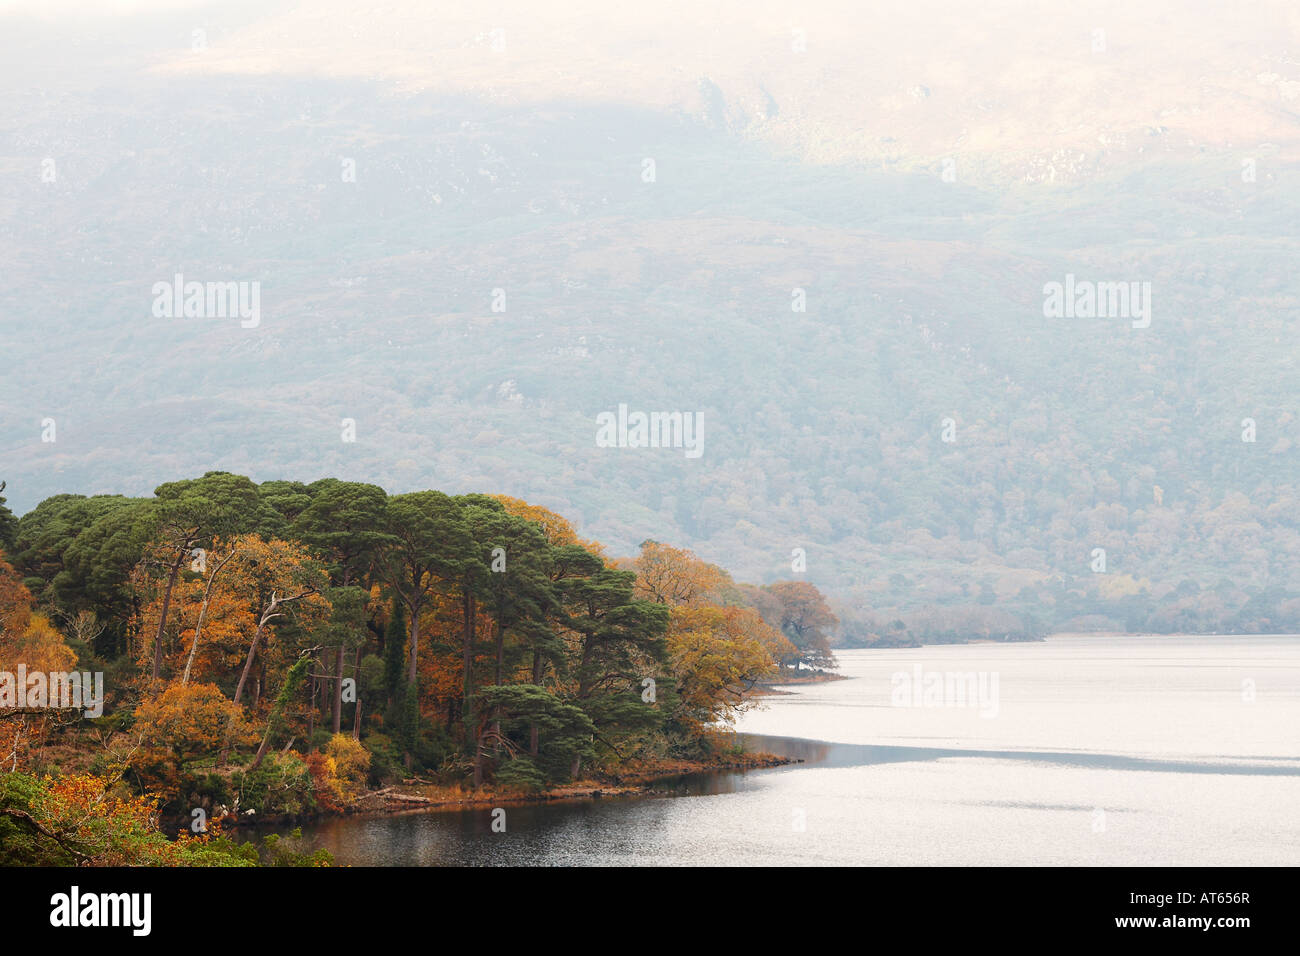 Row of Trees Growing by Lough in Killarney National Park, County Kerry, Republic of Ireland, Europe Stock Photo